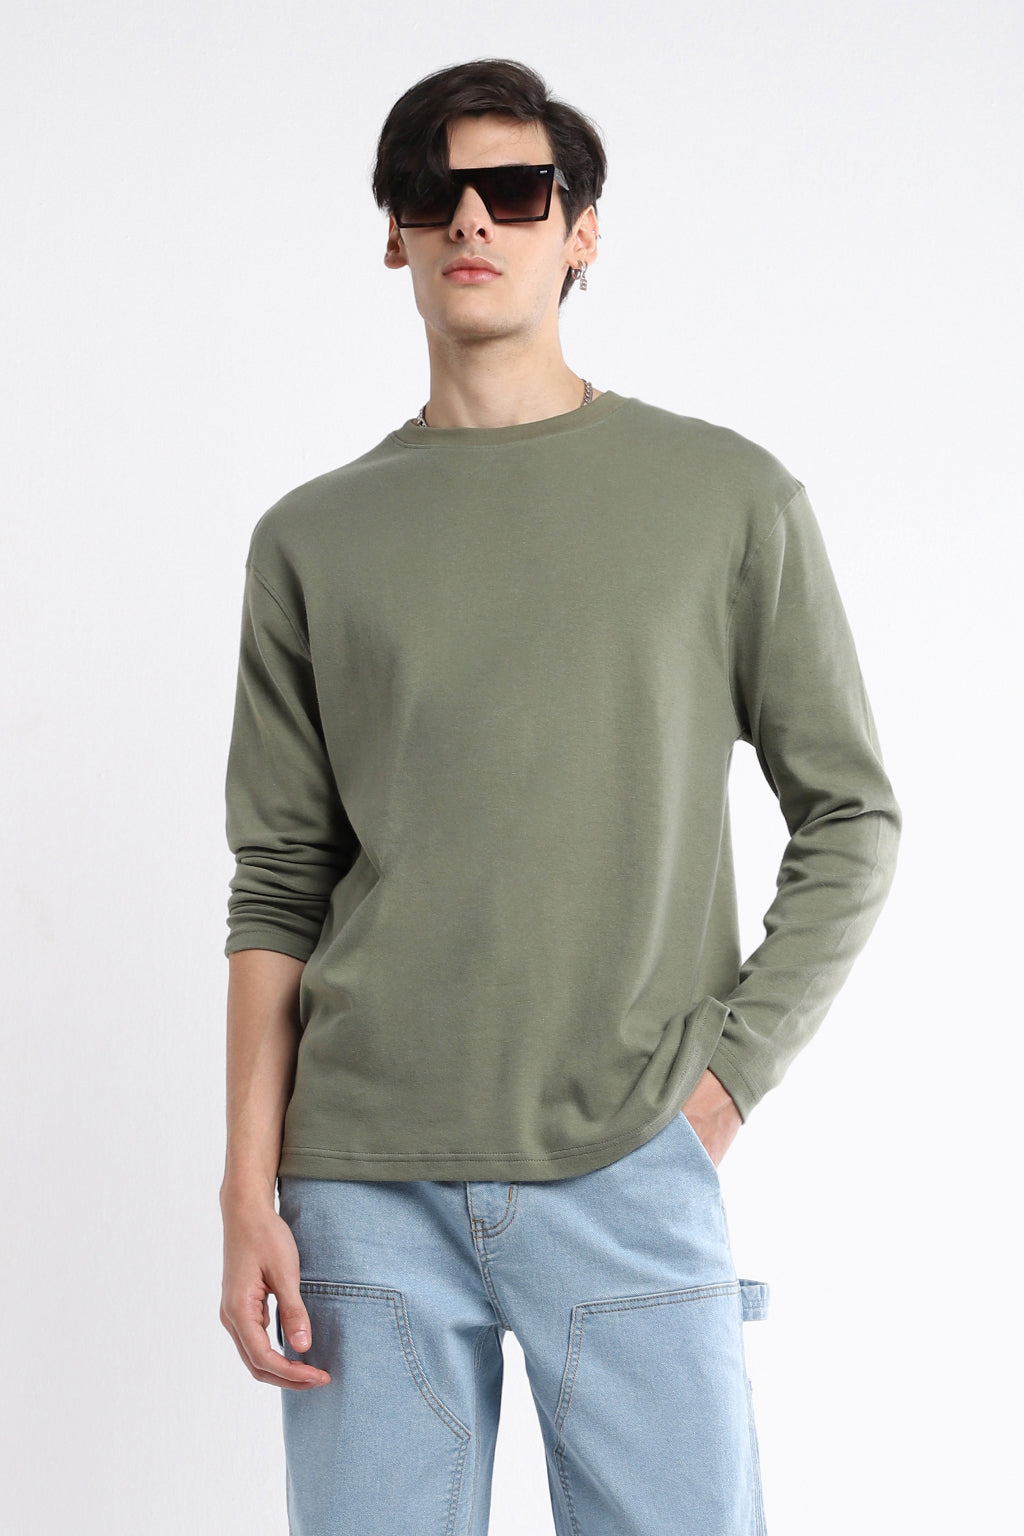 SOLID GREEN T-SHIRT